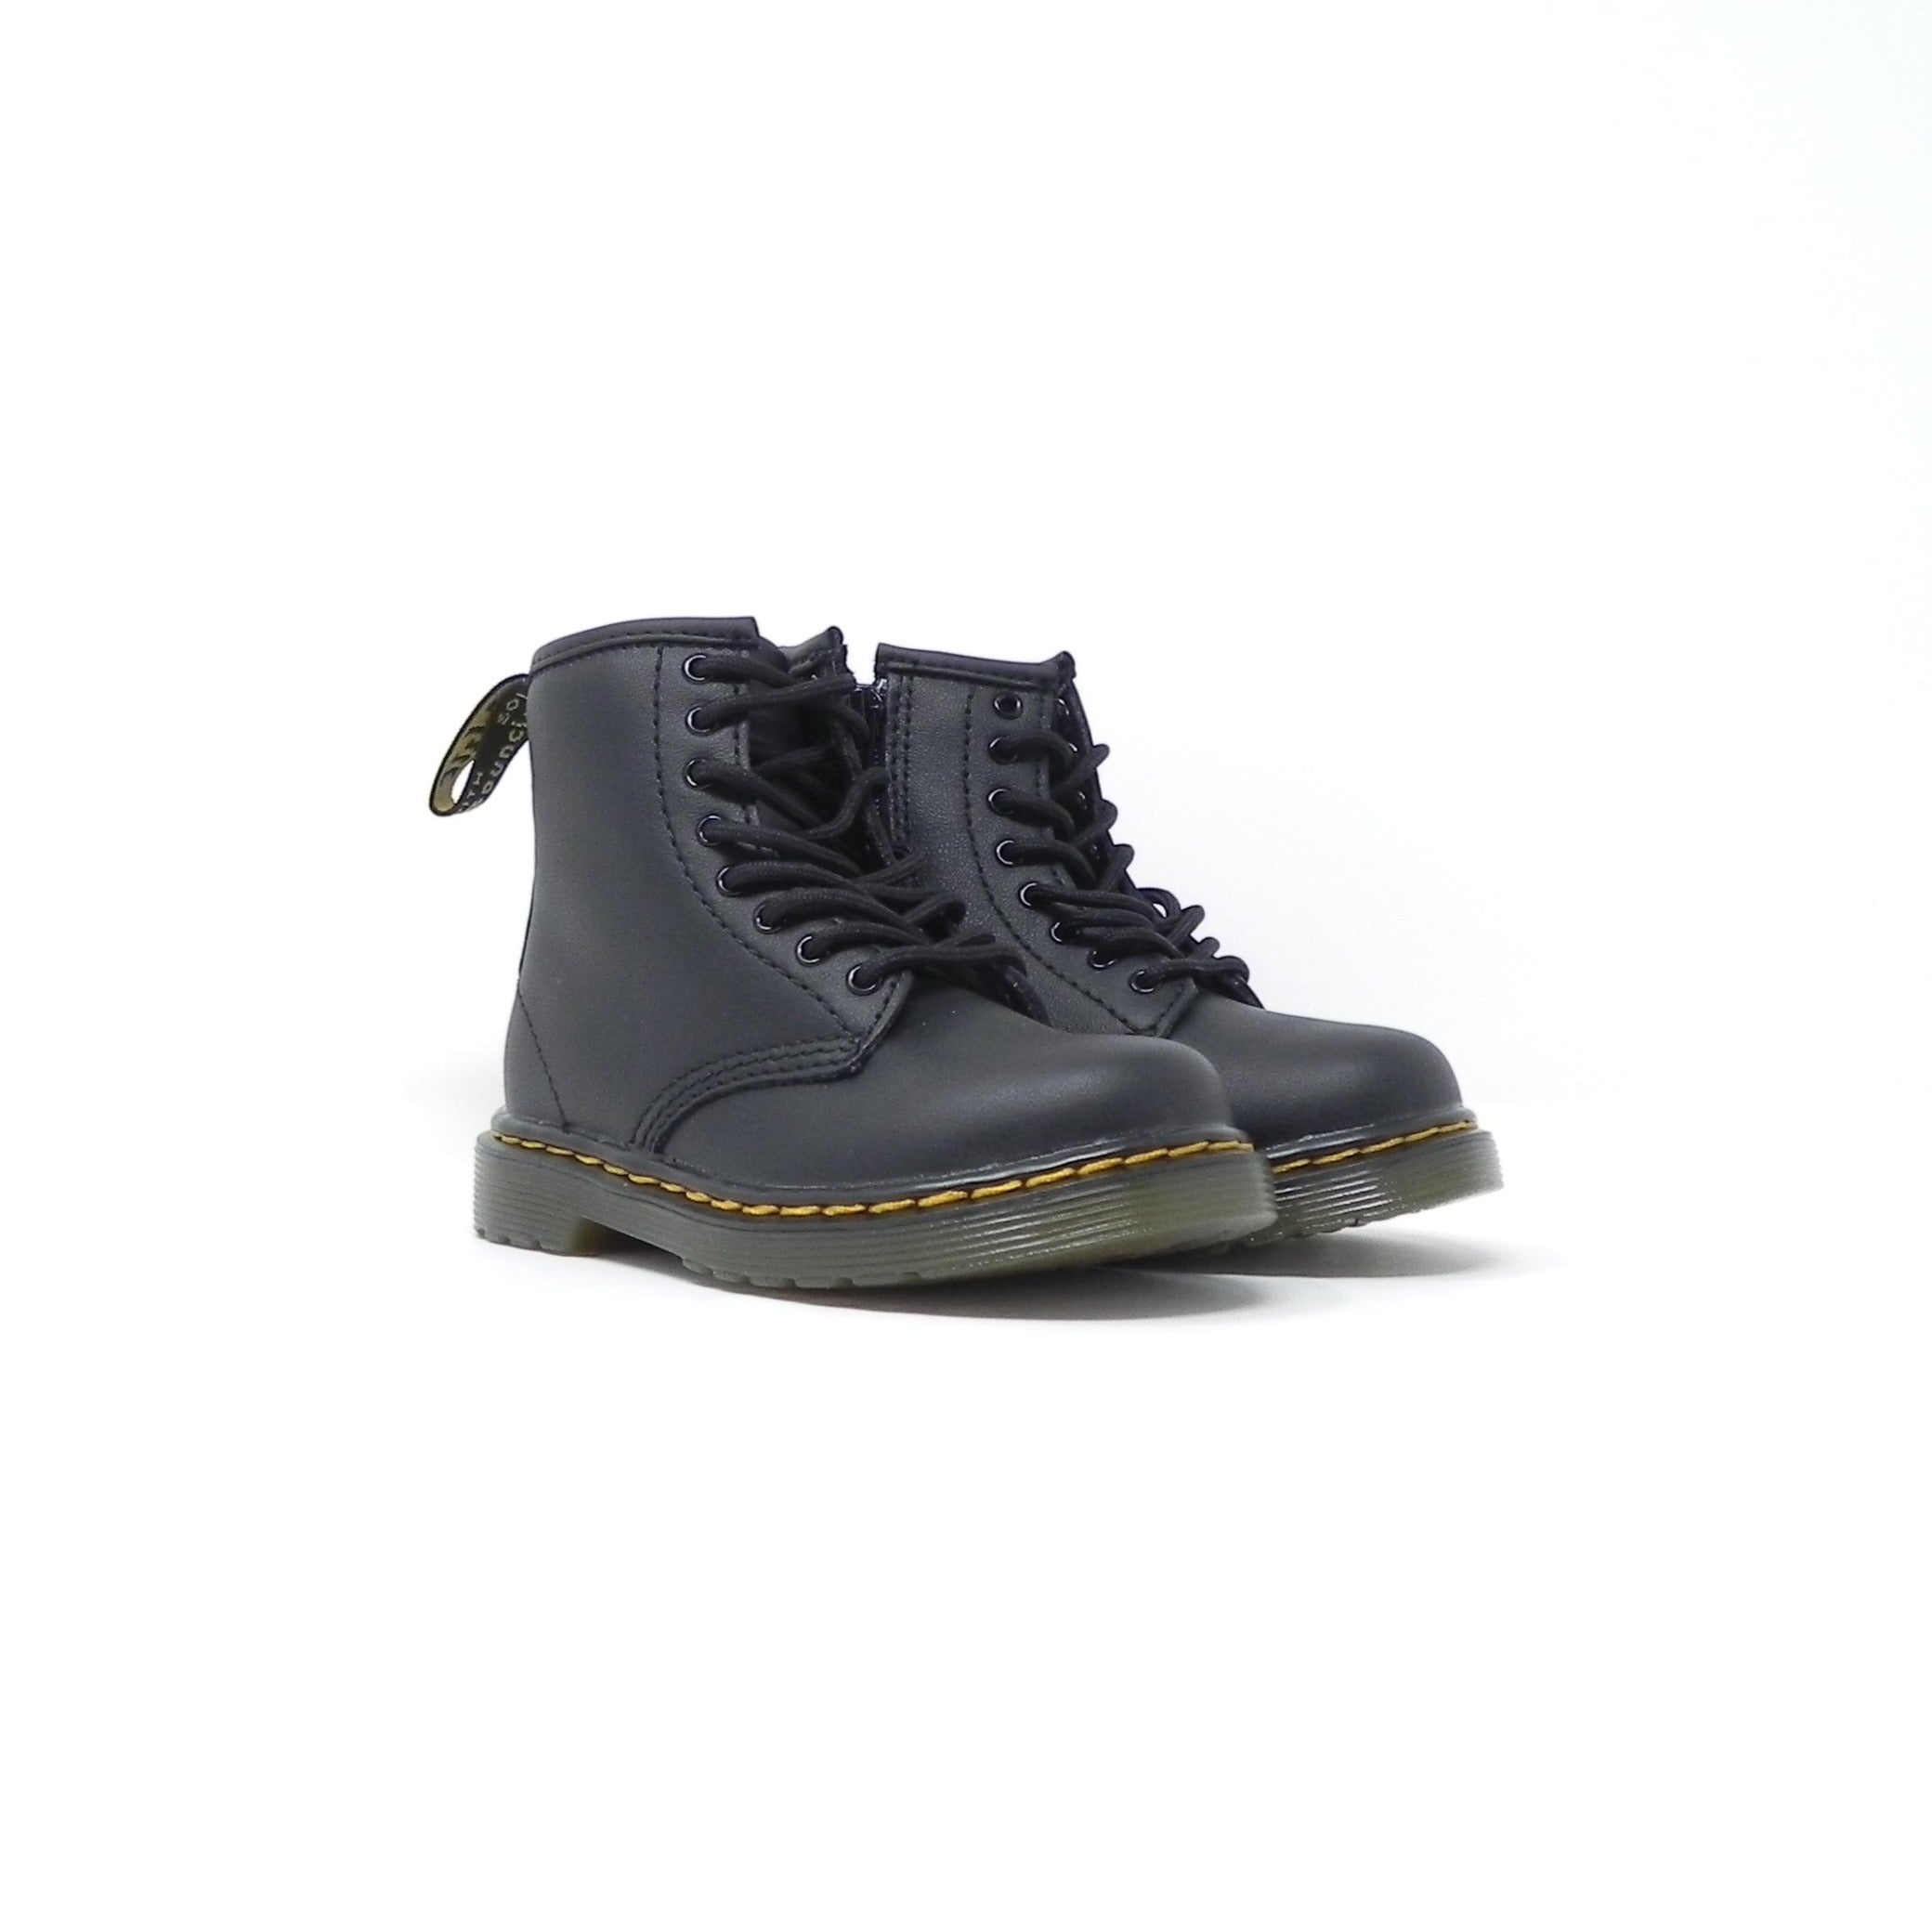 DR. MARTENS - Stivaletti Anfibi Softy t infant